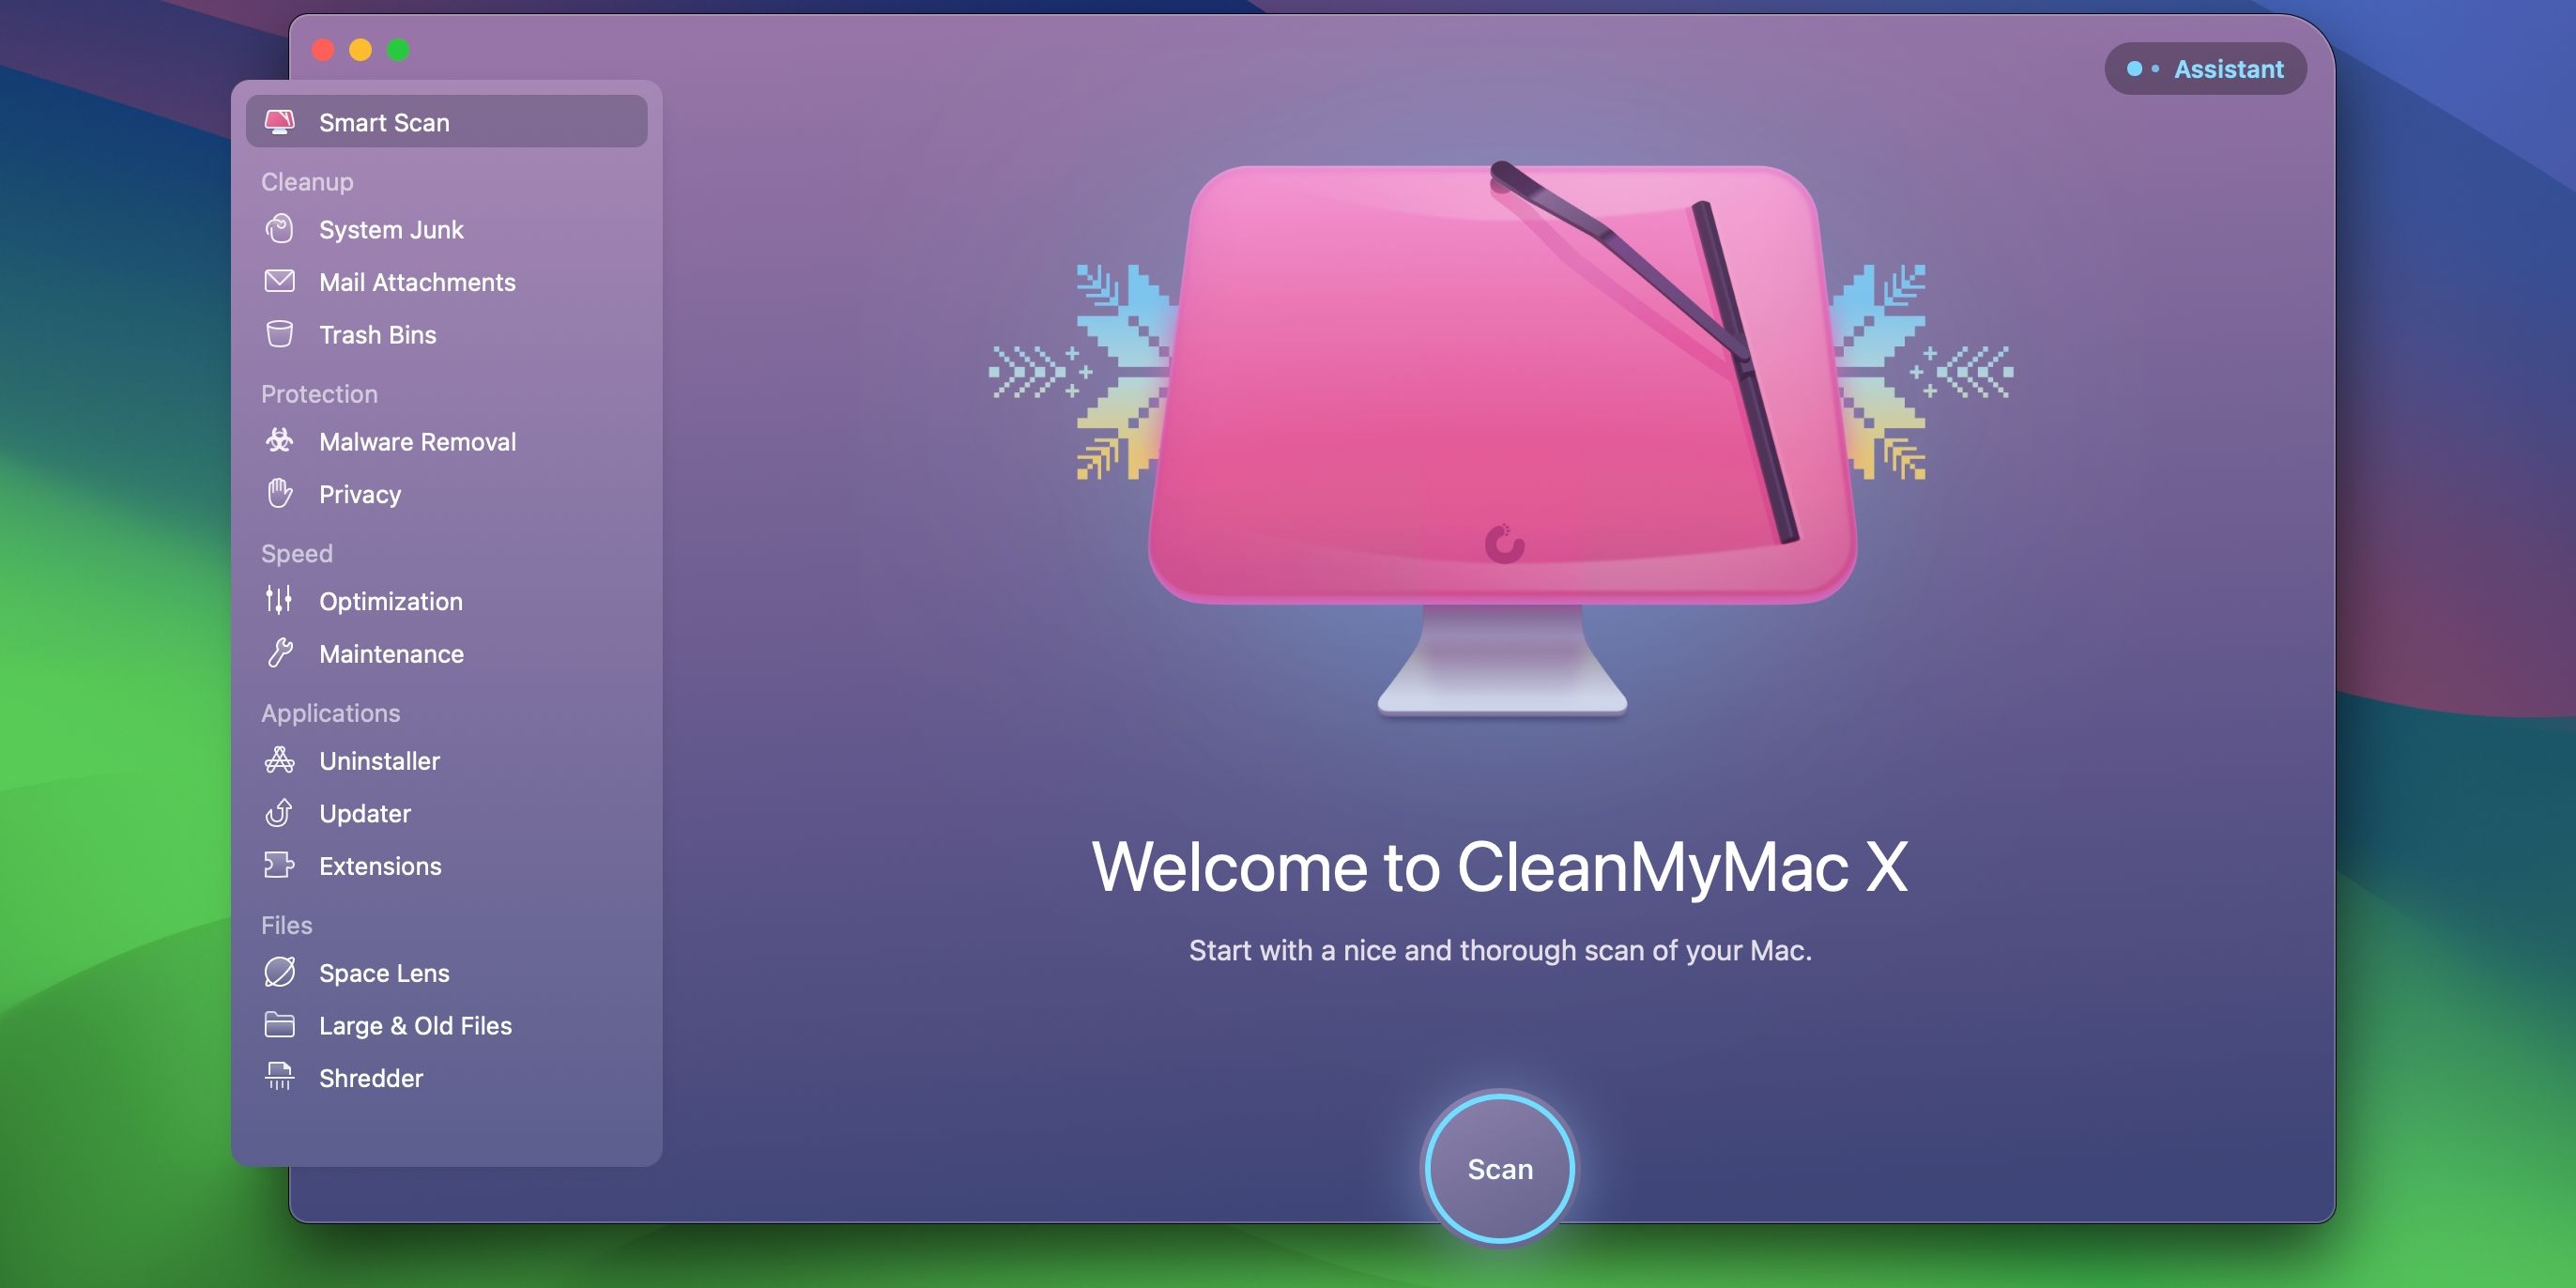 MacPaw CleanMyMac with the Smart Scan option selected